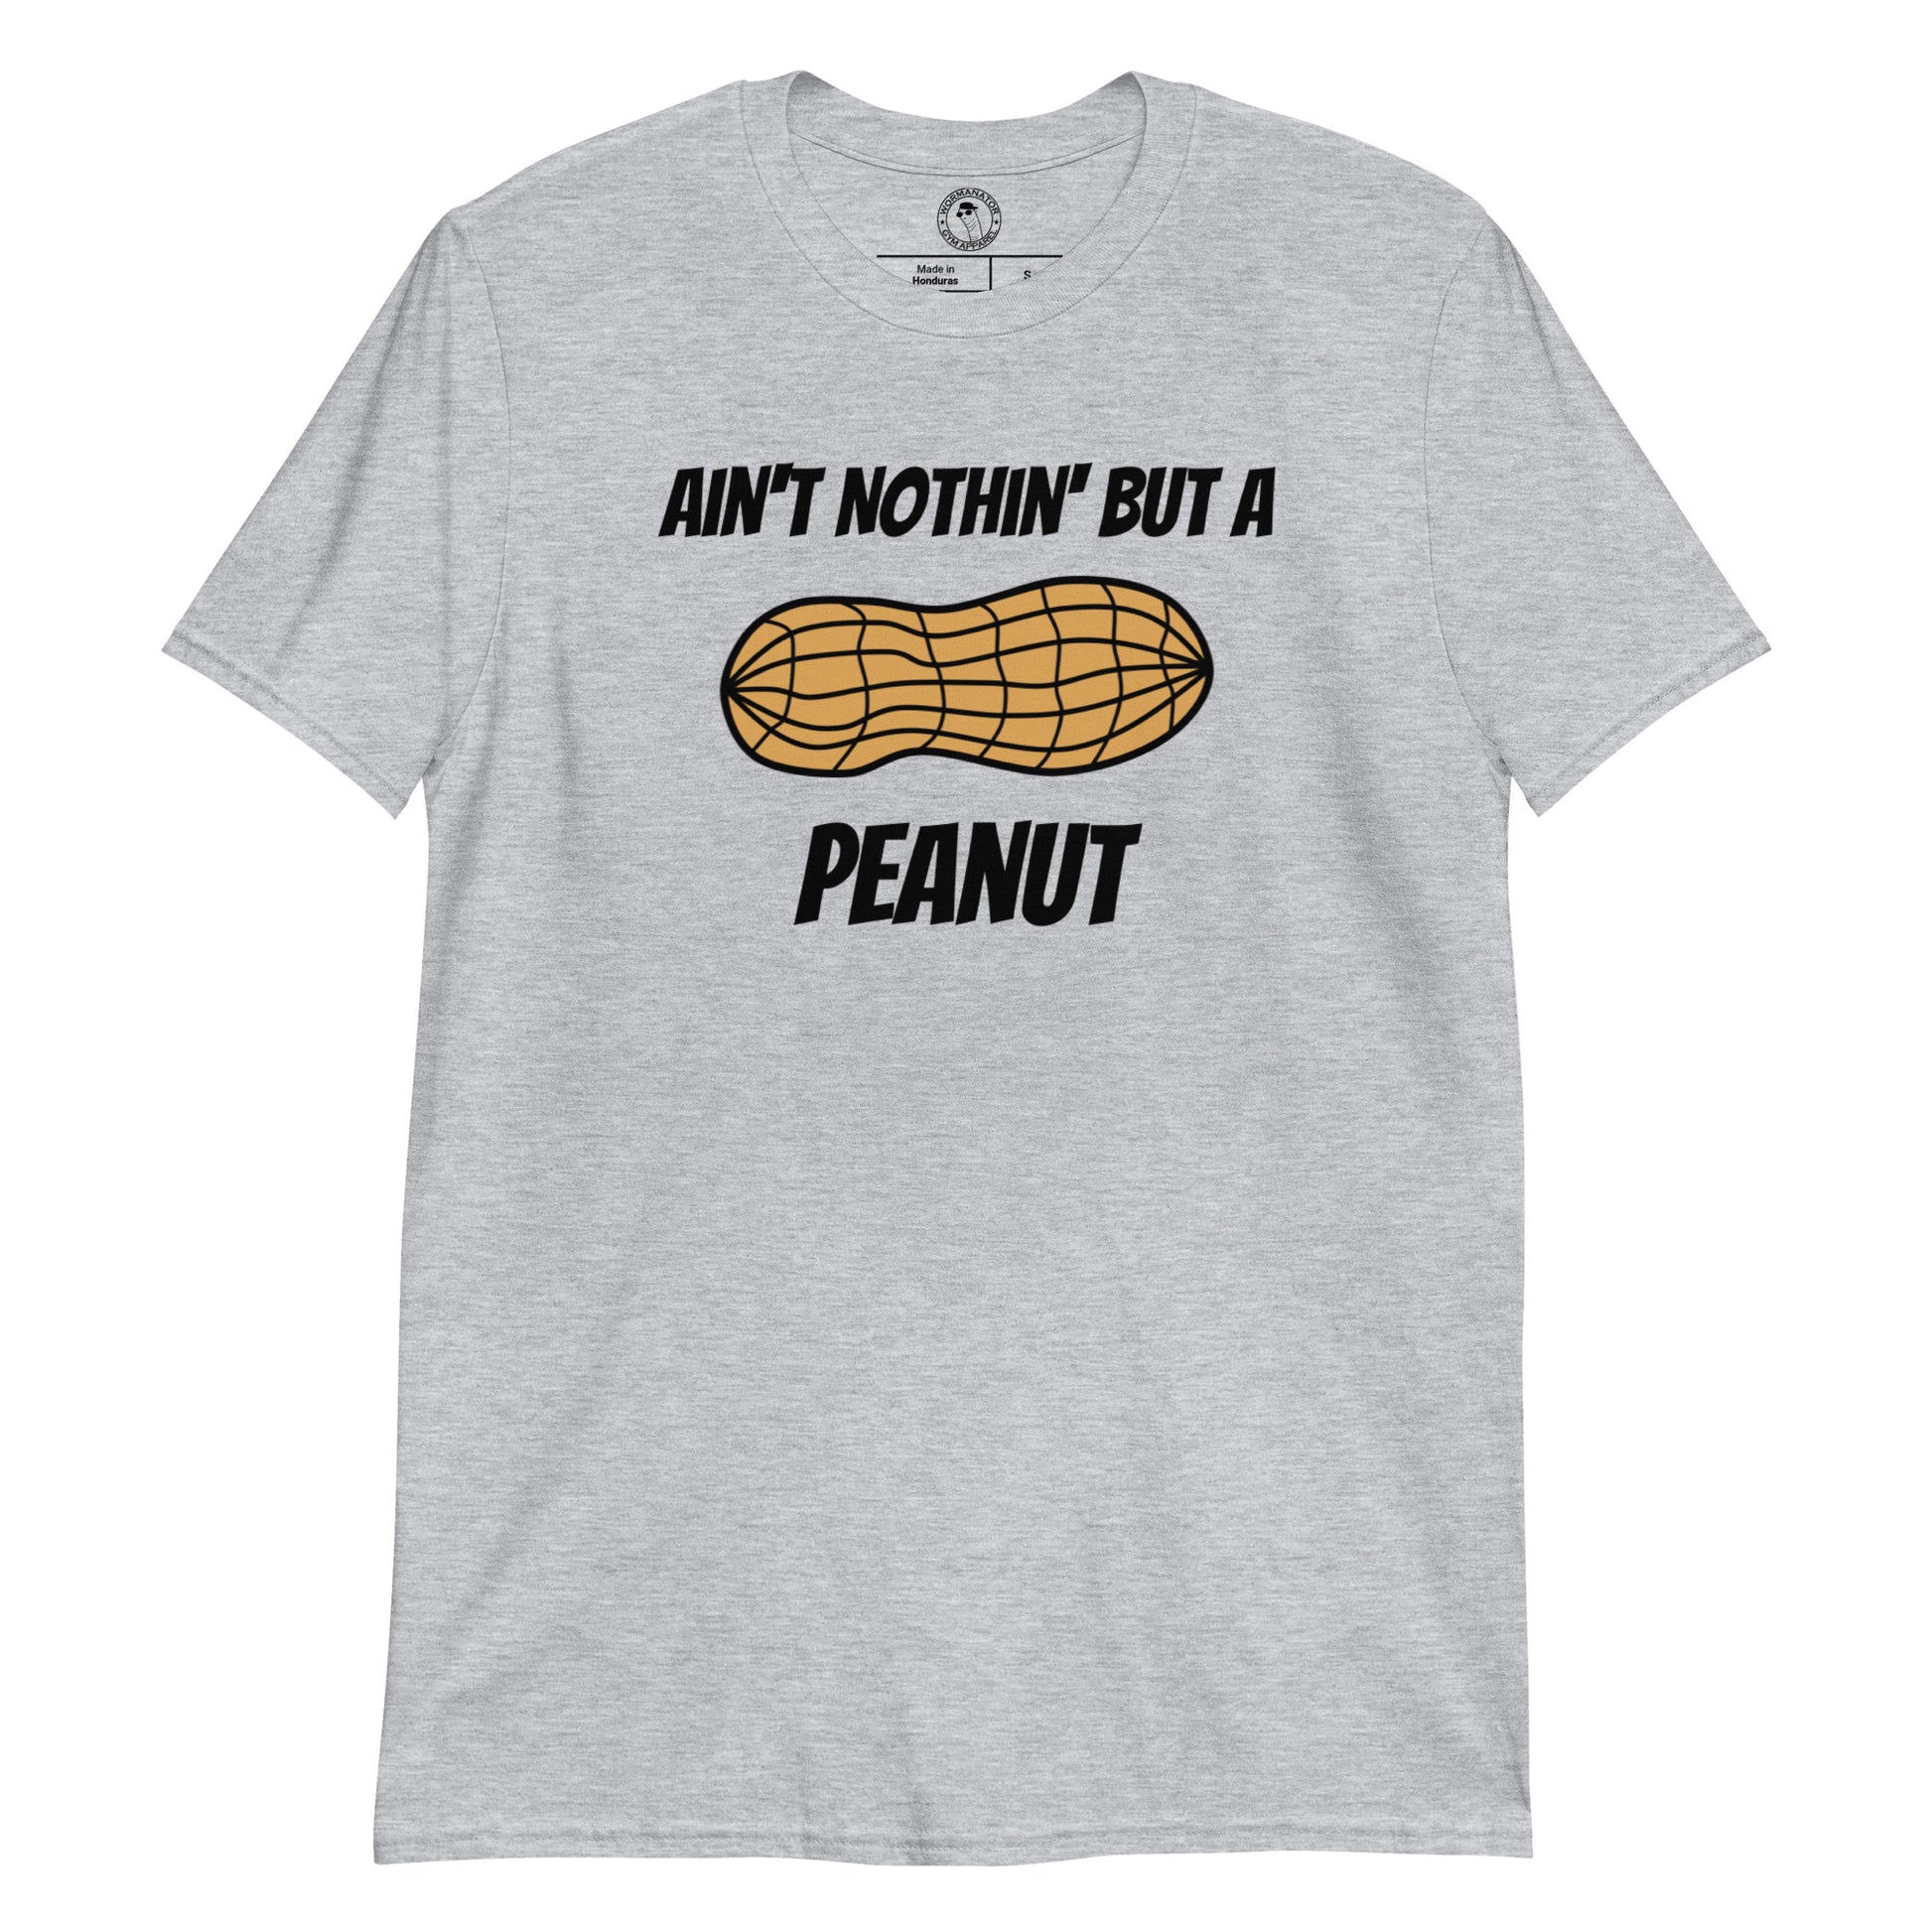 Ain't Nothin' but a Peanut Shirt in Sport Grey